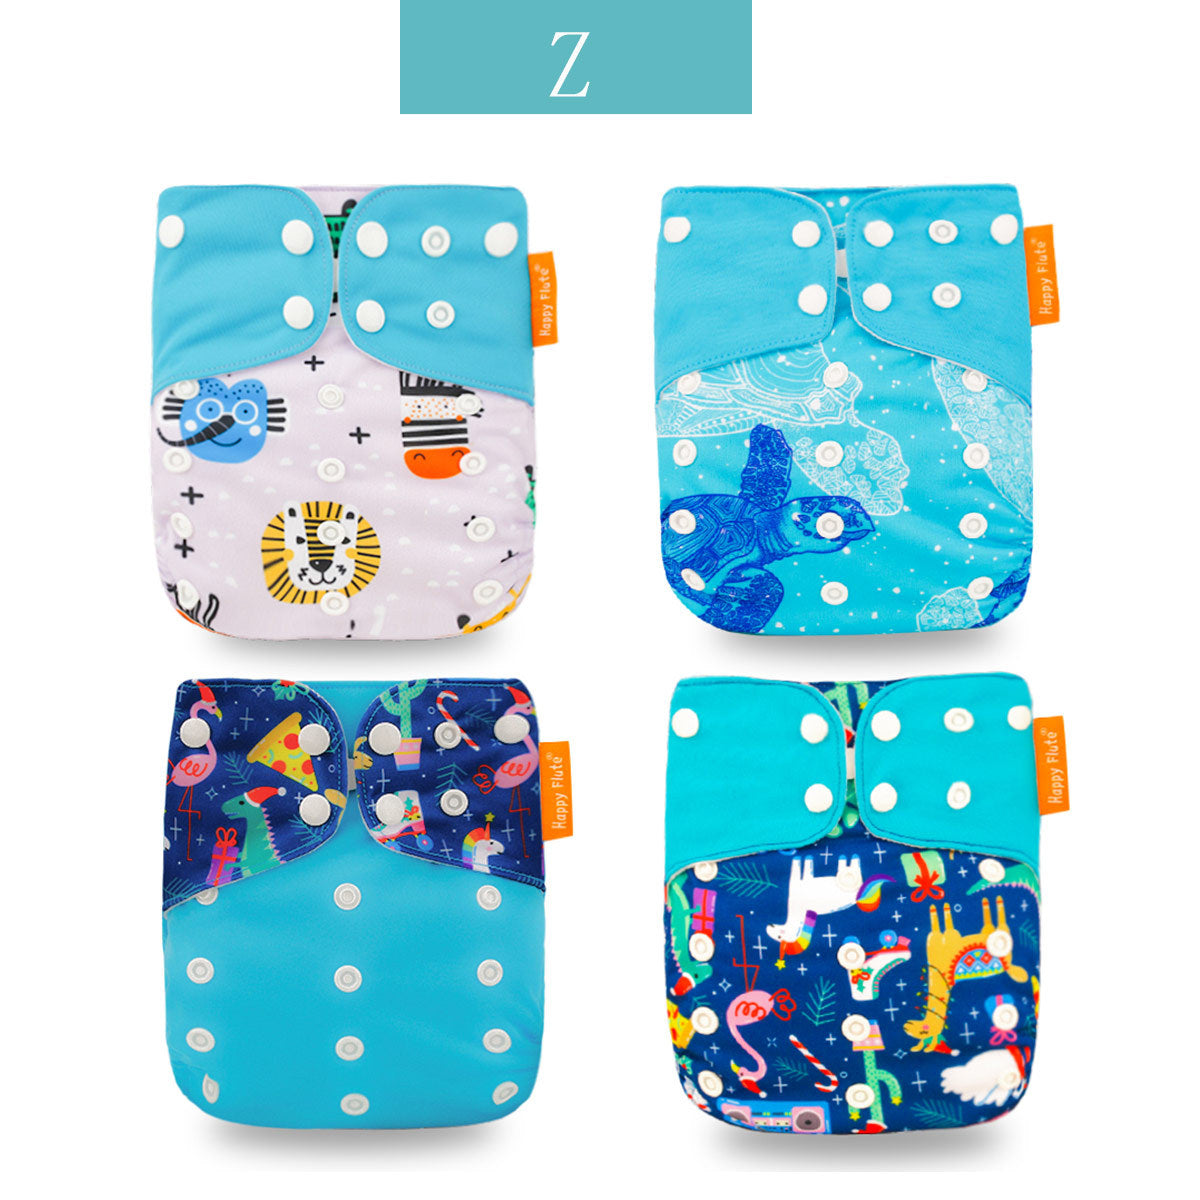 Washable Eco-friendly Cloth Diaper Ecological Adjustable Nappy Reusable Diaper